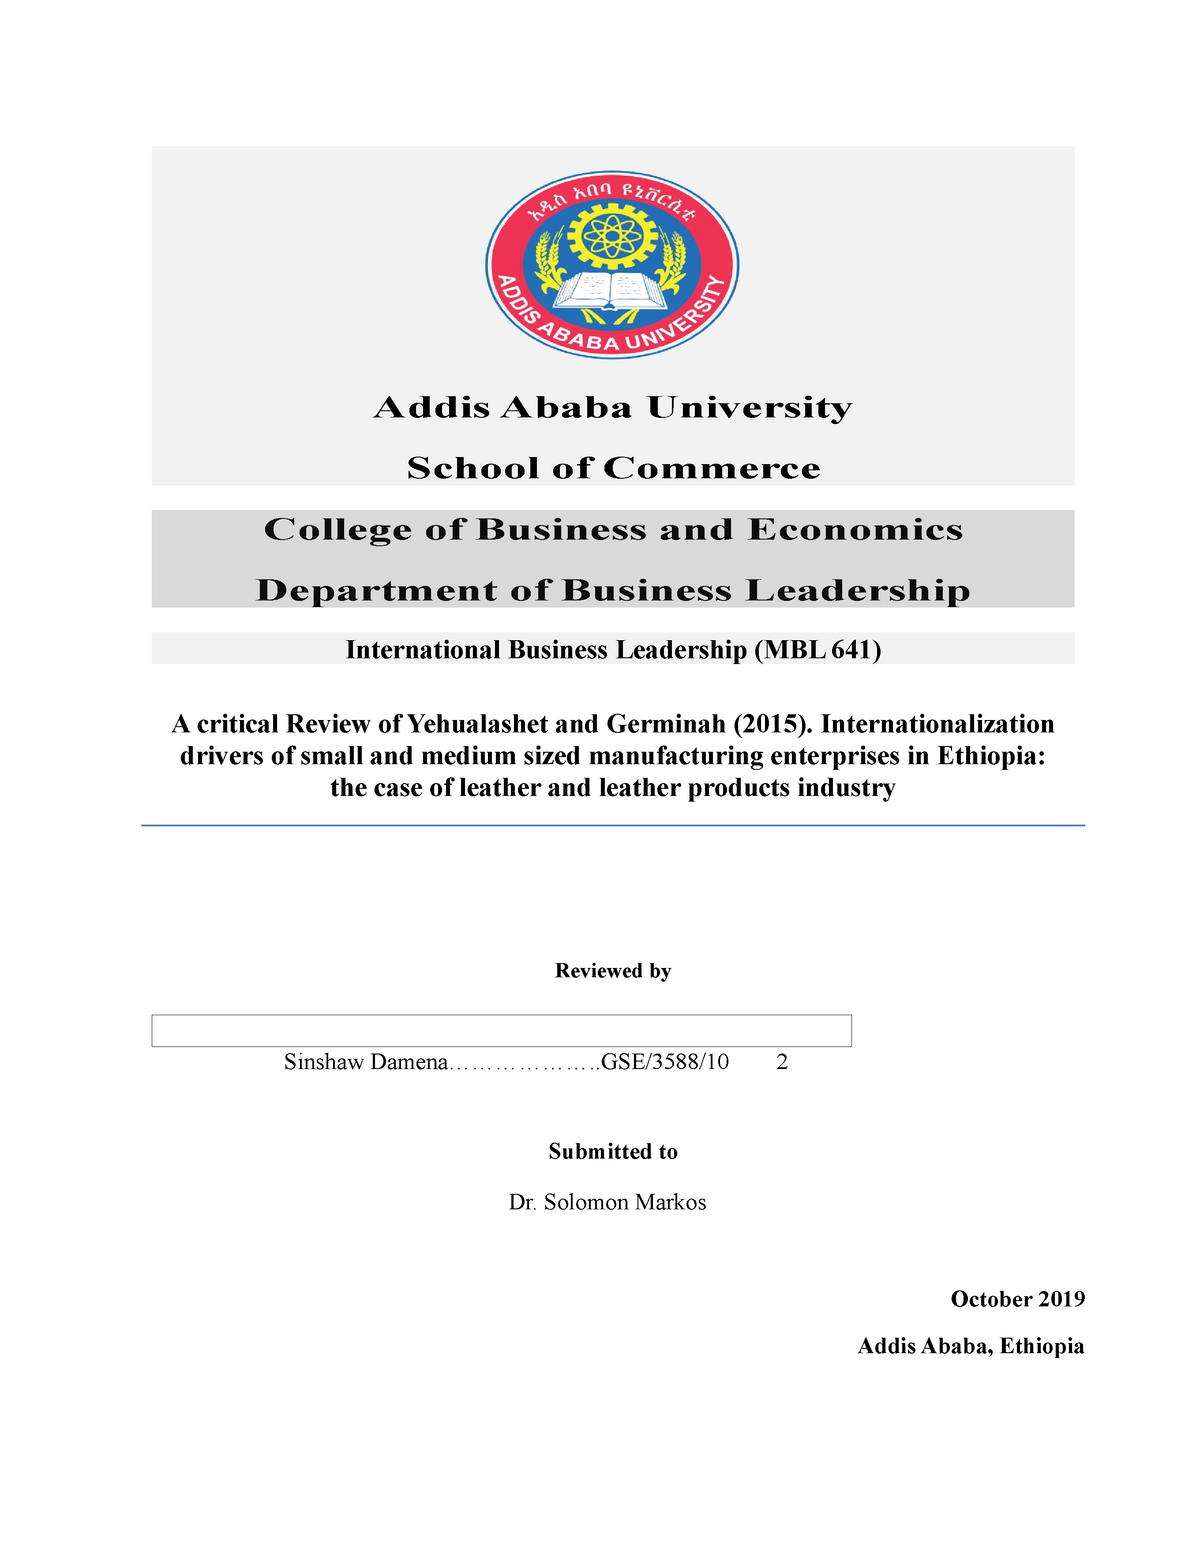 article review addis ababa university